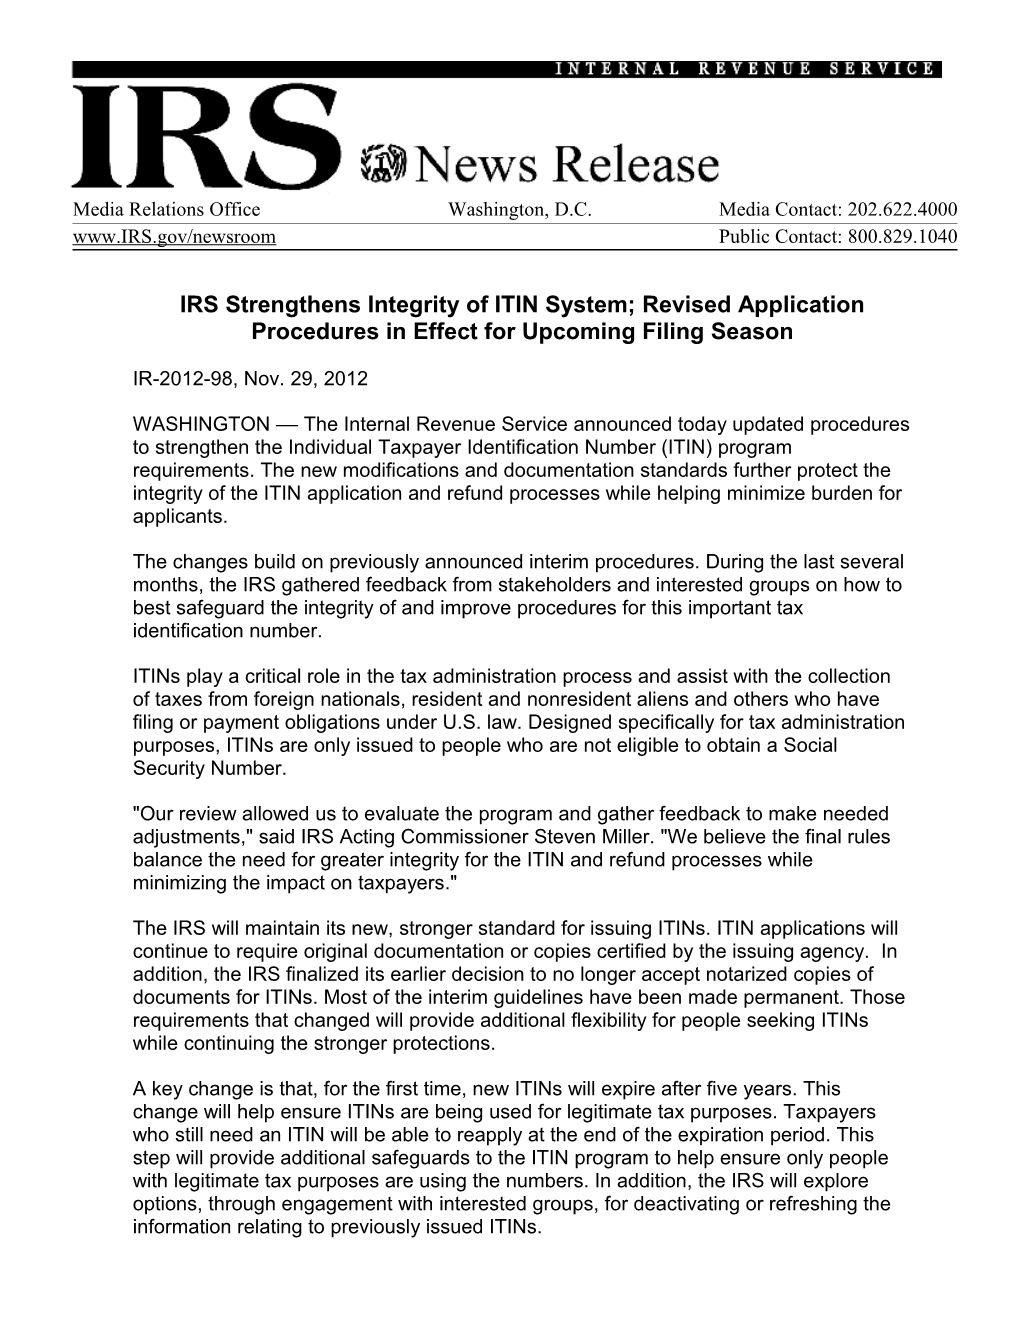 IRS Strengthens Integrity of ITIN System; Revised Application Procedures in Effect For